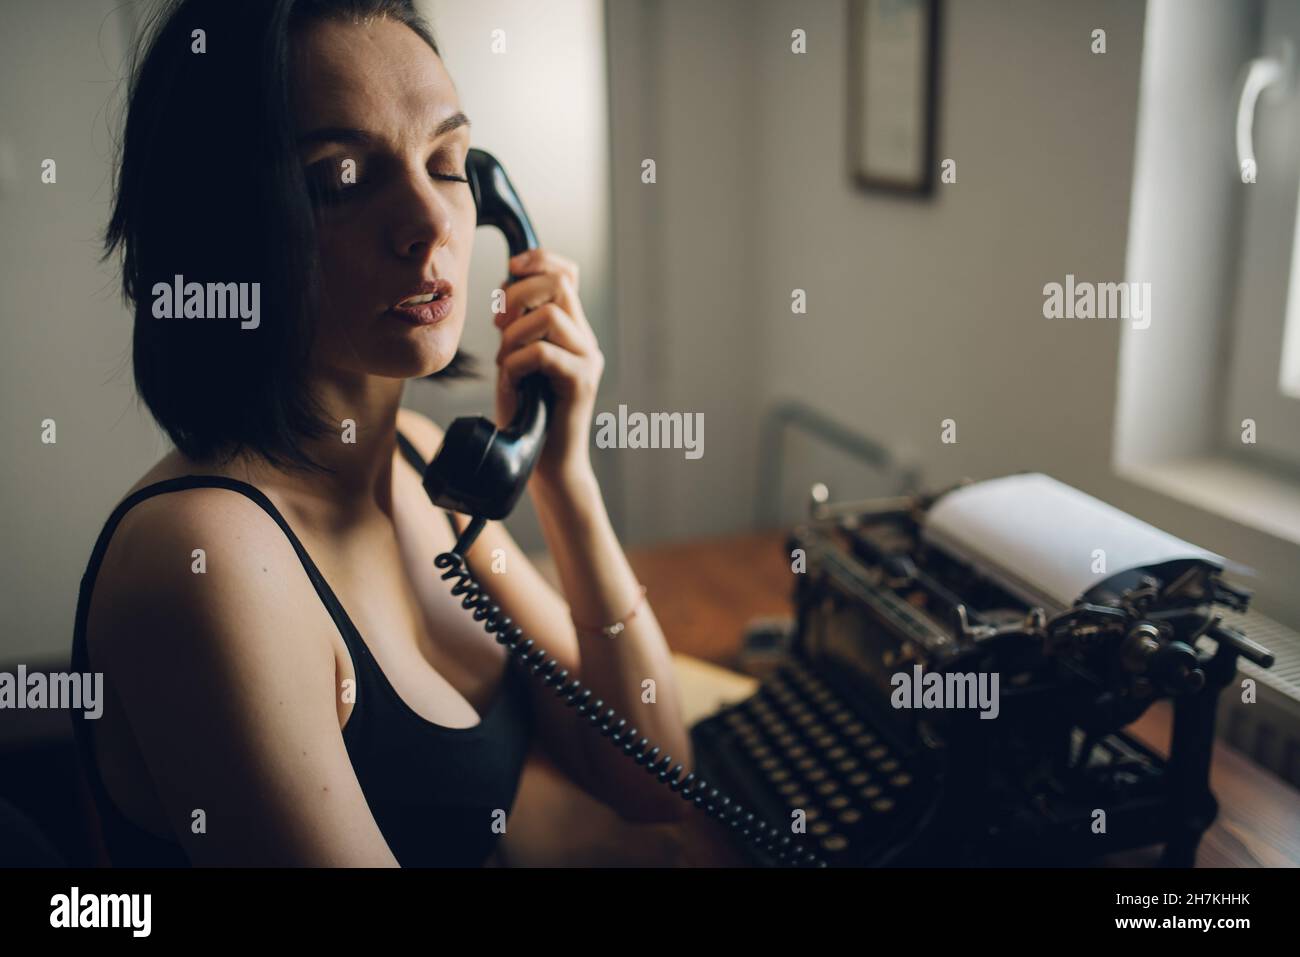 Lonely woman making a phone call at home closeup. Stock Photo